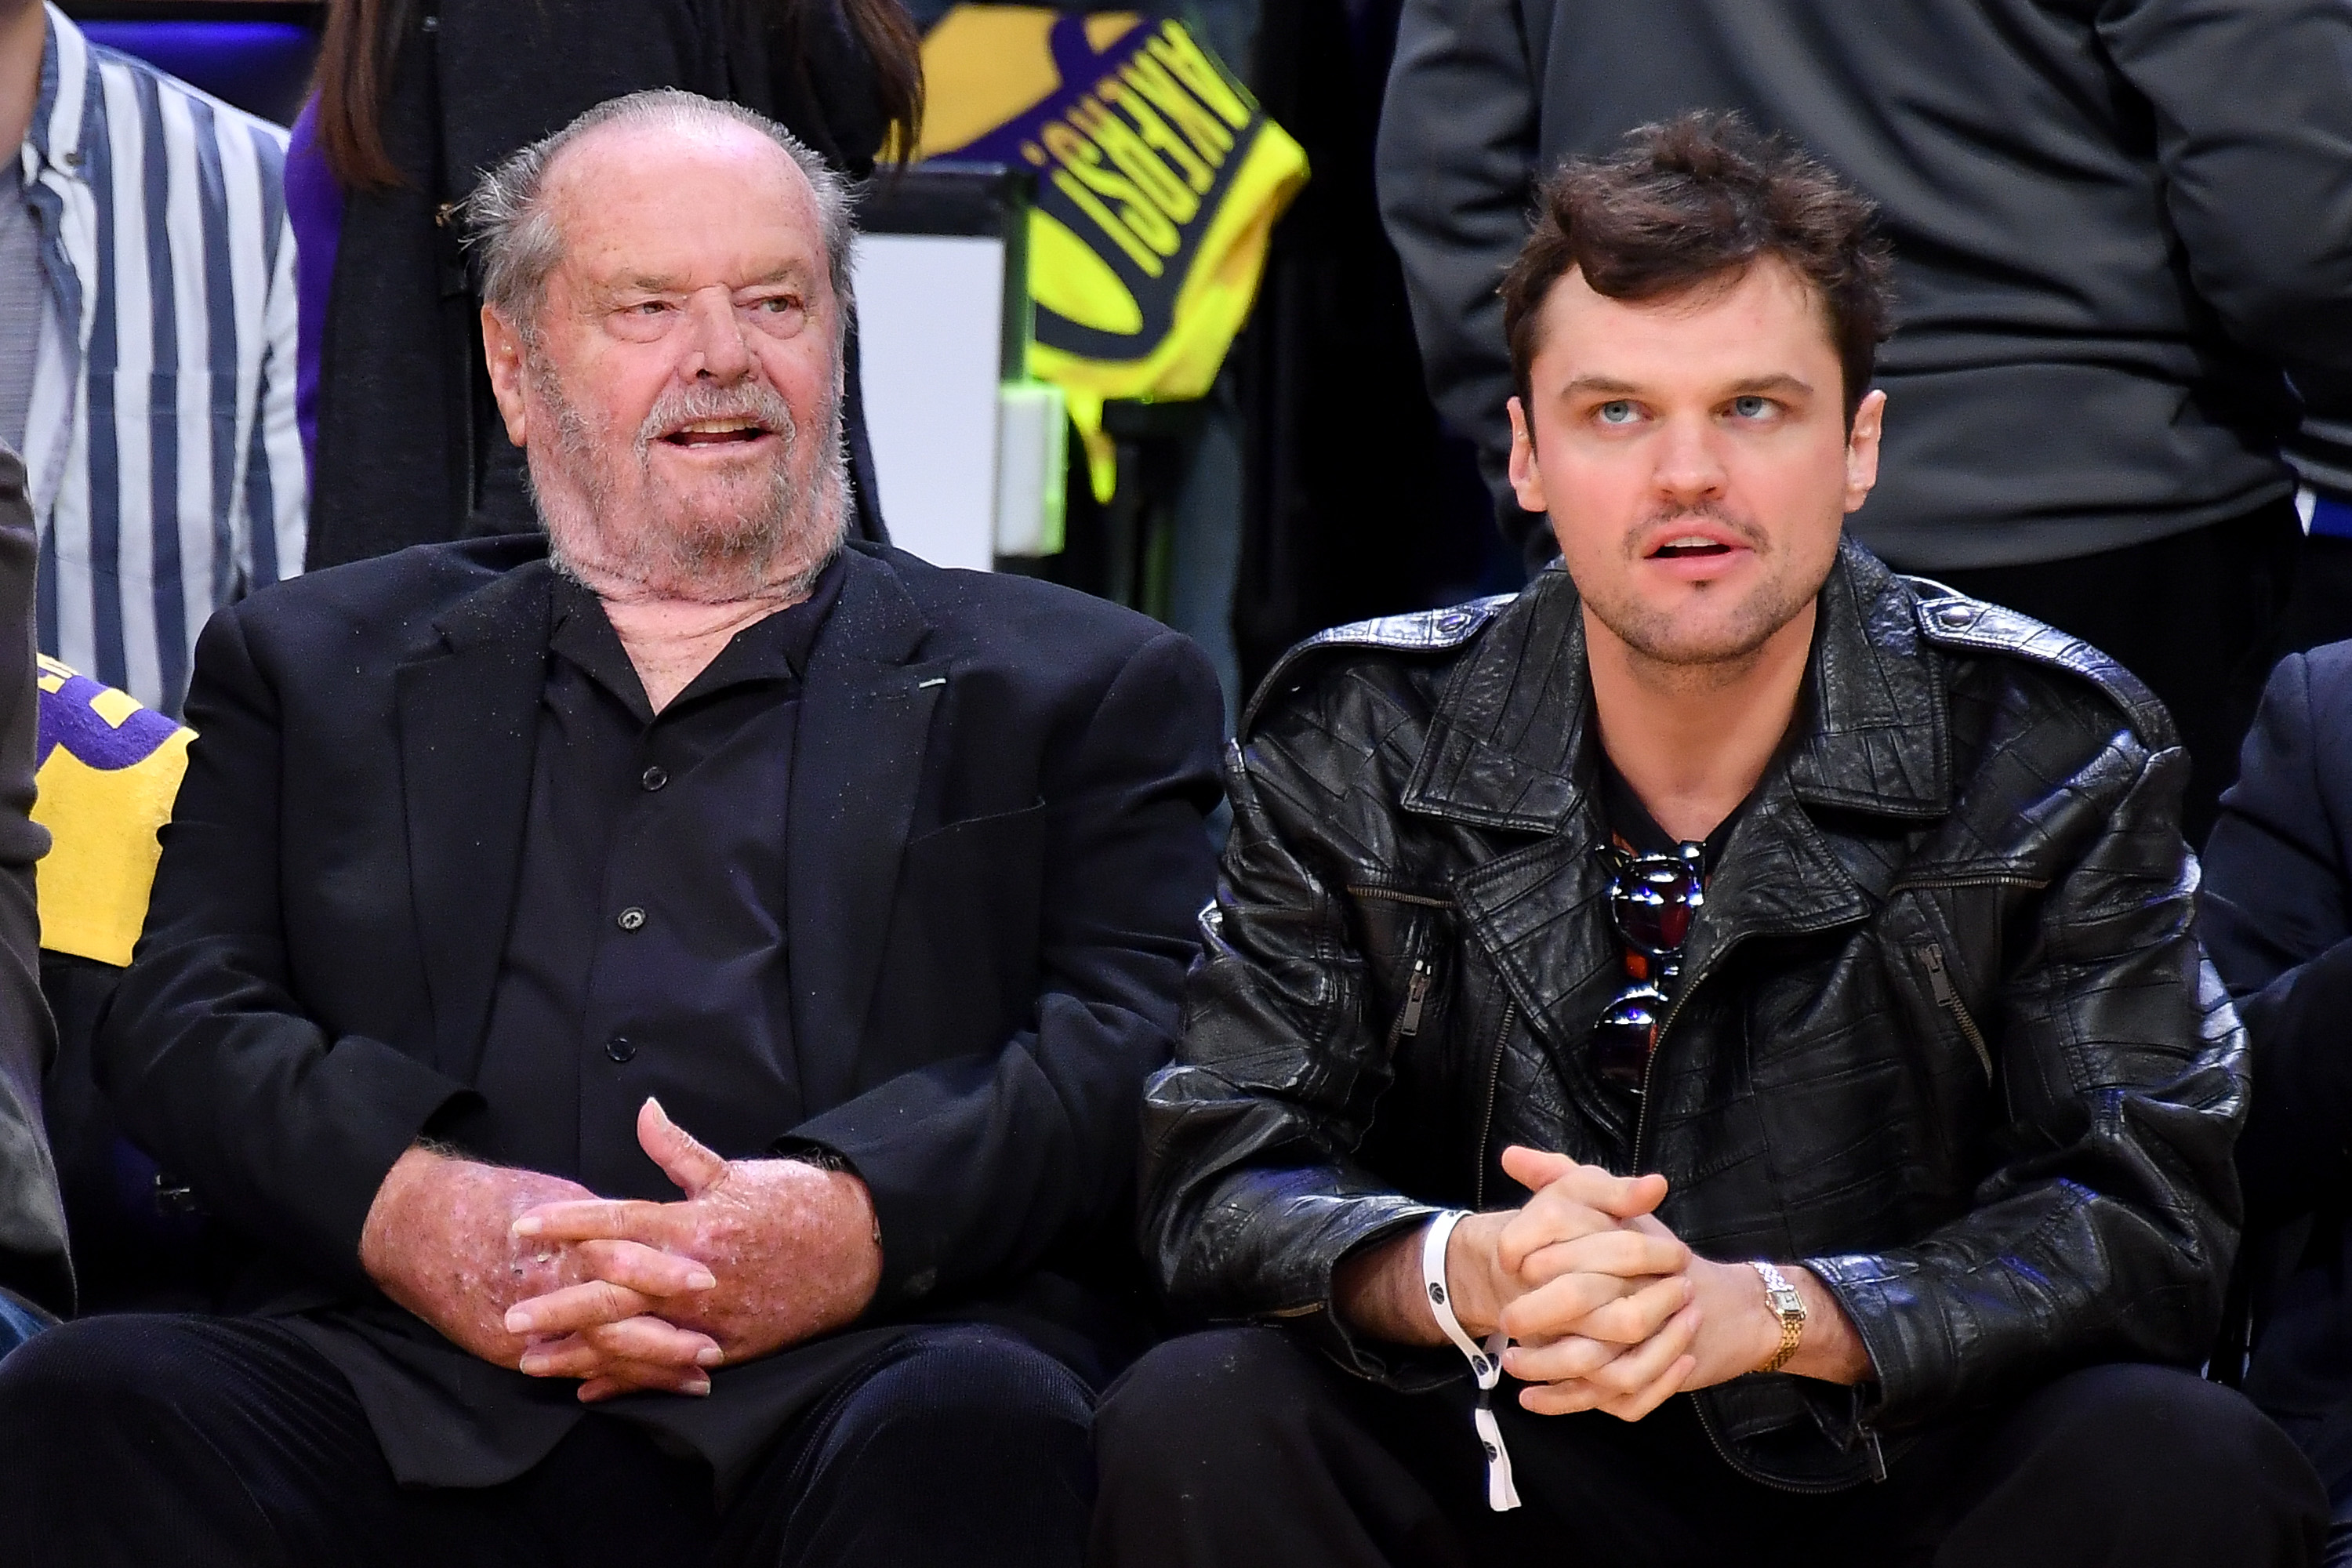 Jack Nicholson and Ray Nicholson attend a playoff basketball game between the Los Angeles Lakers and the Golden State Warriors at Crypto.com Arena on May 08, 2023, in Los Angeles, California. | Source: Getty Images